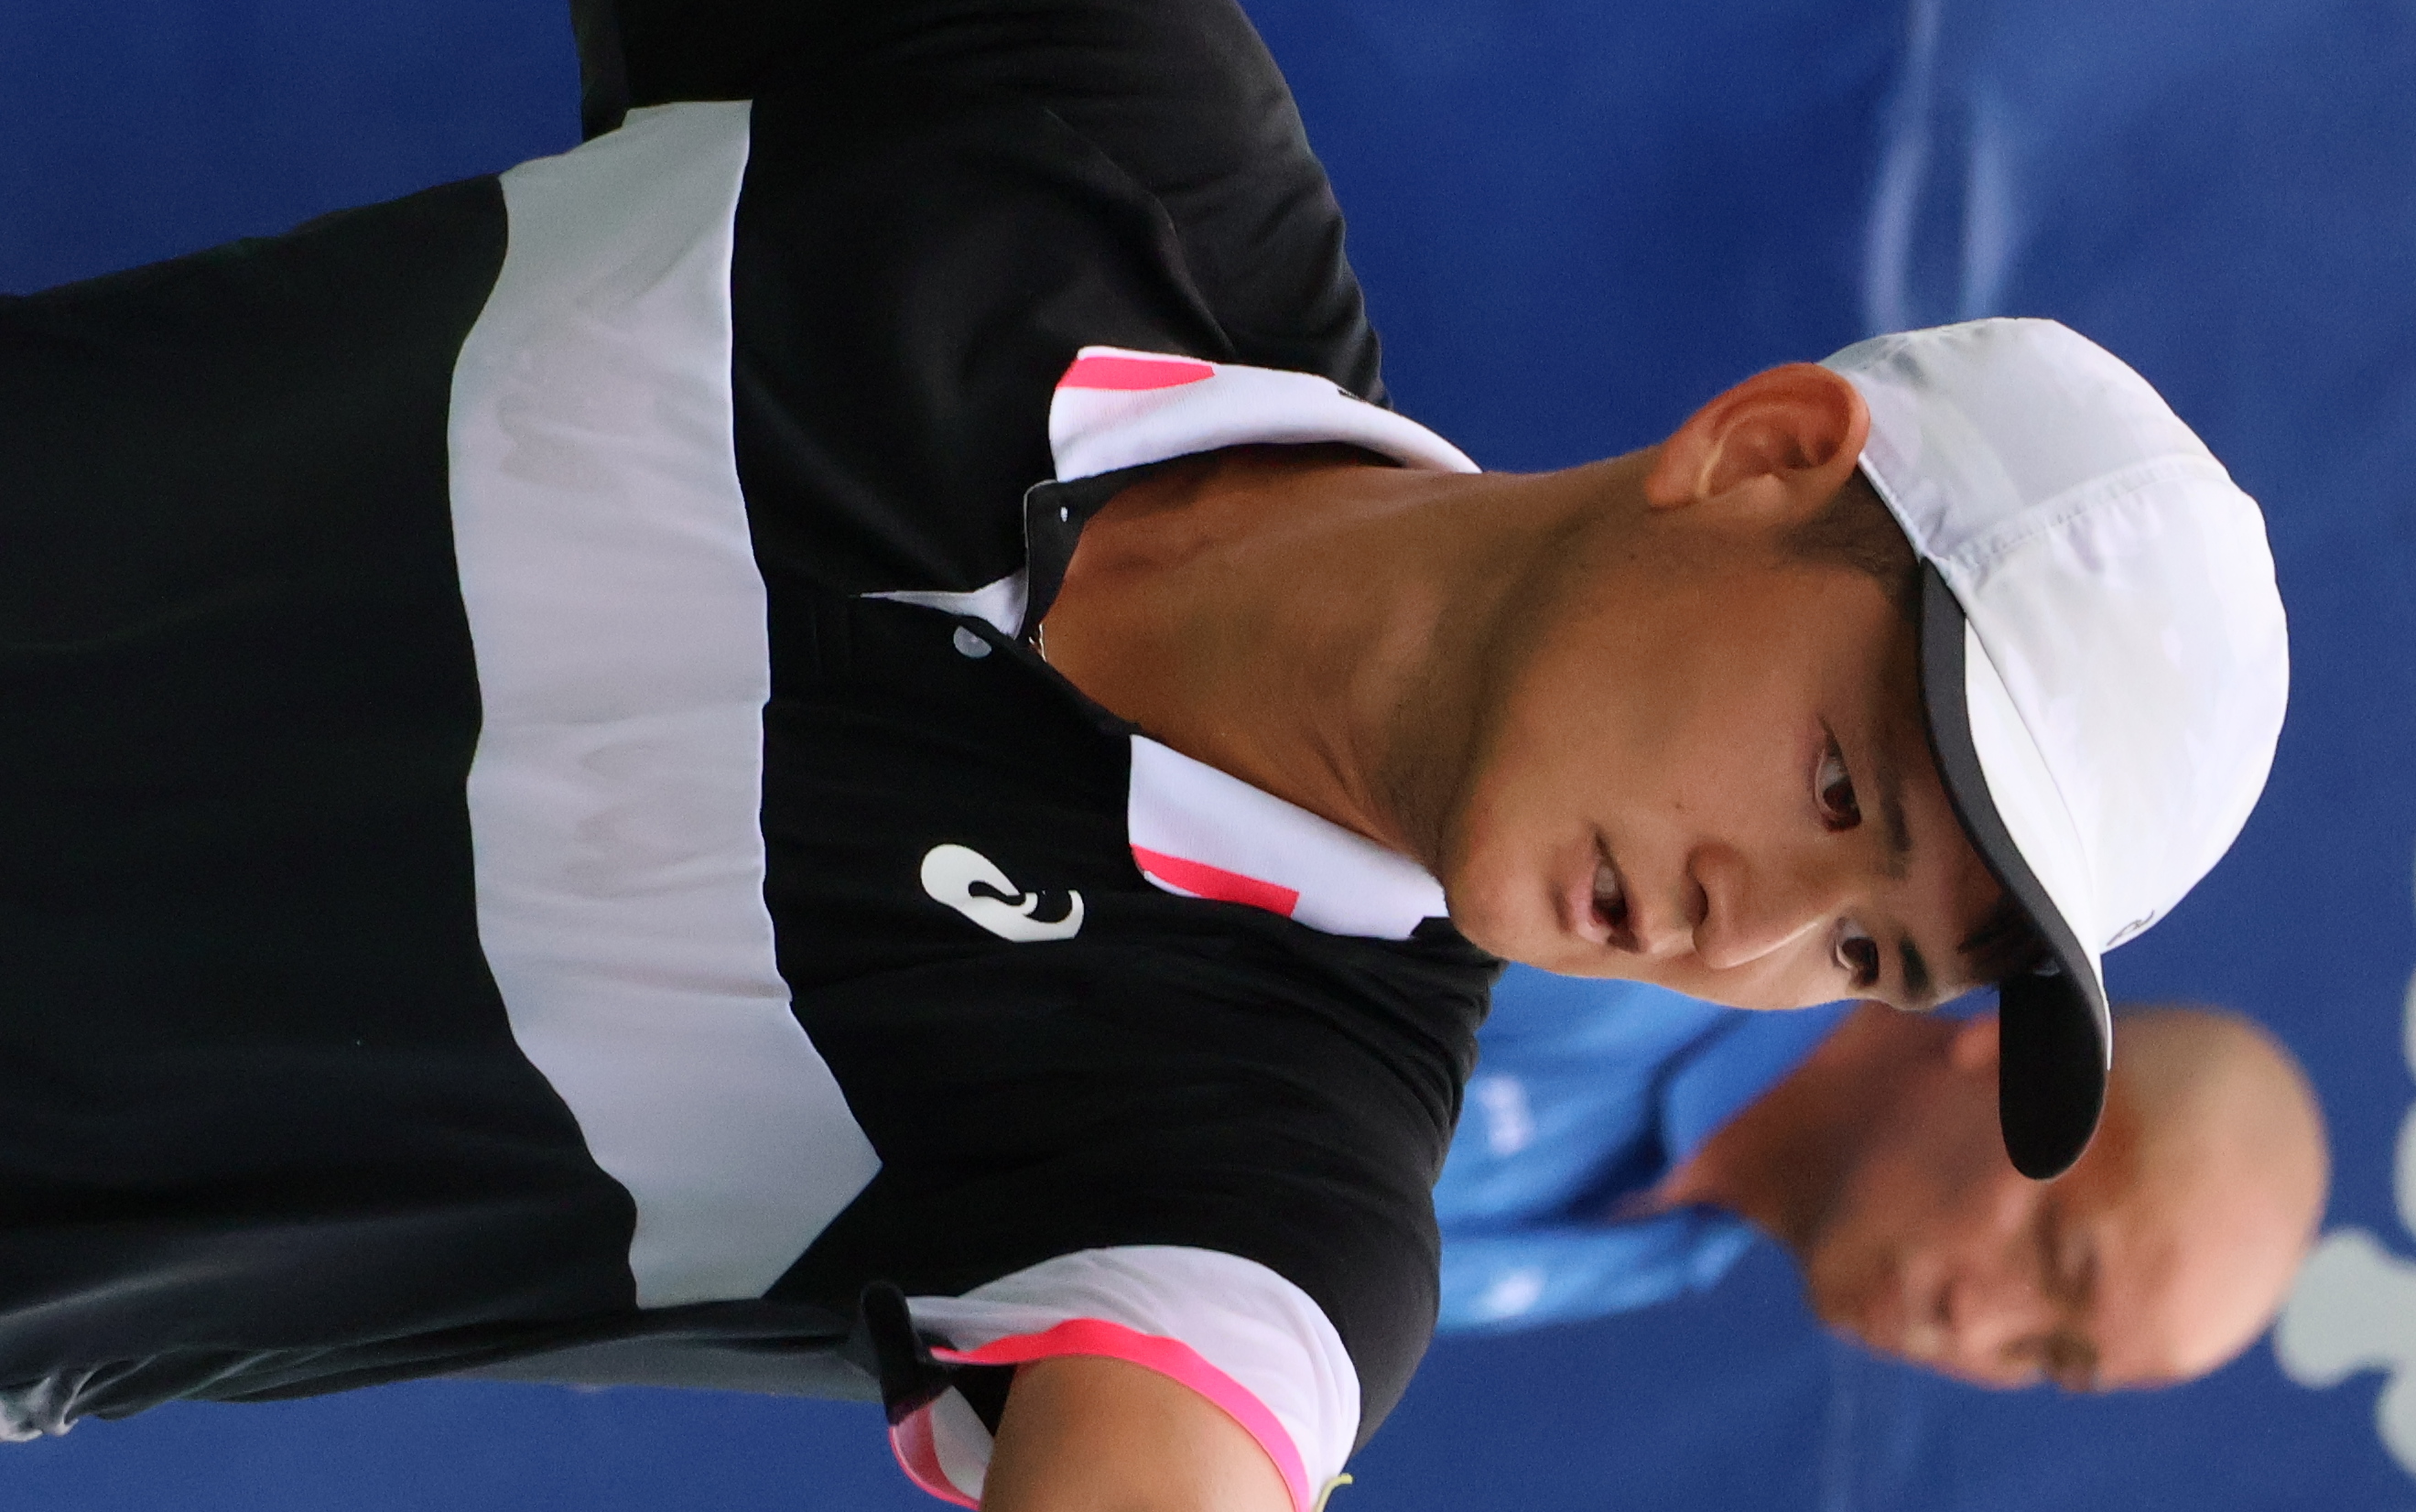 Tung-Lin Wu, Overview, ATP Tour